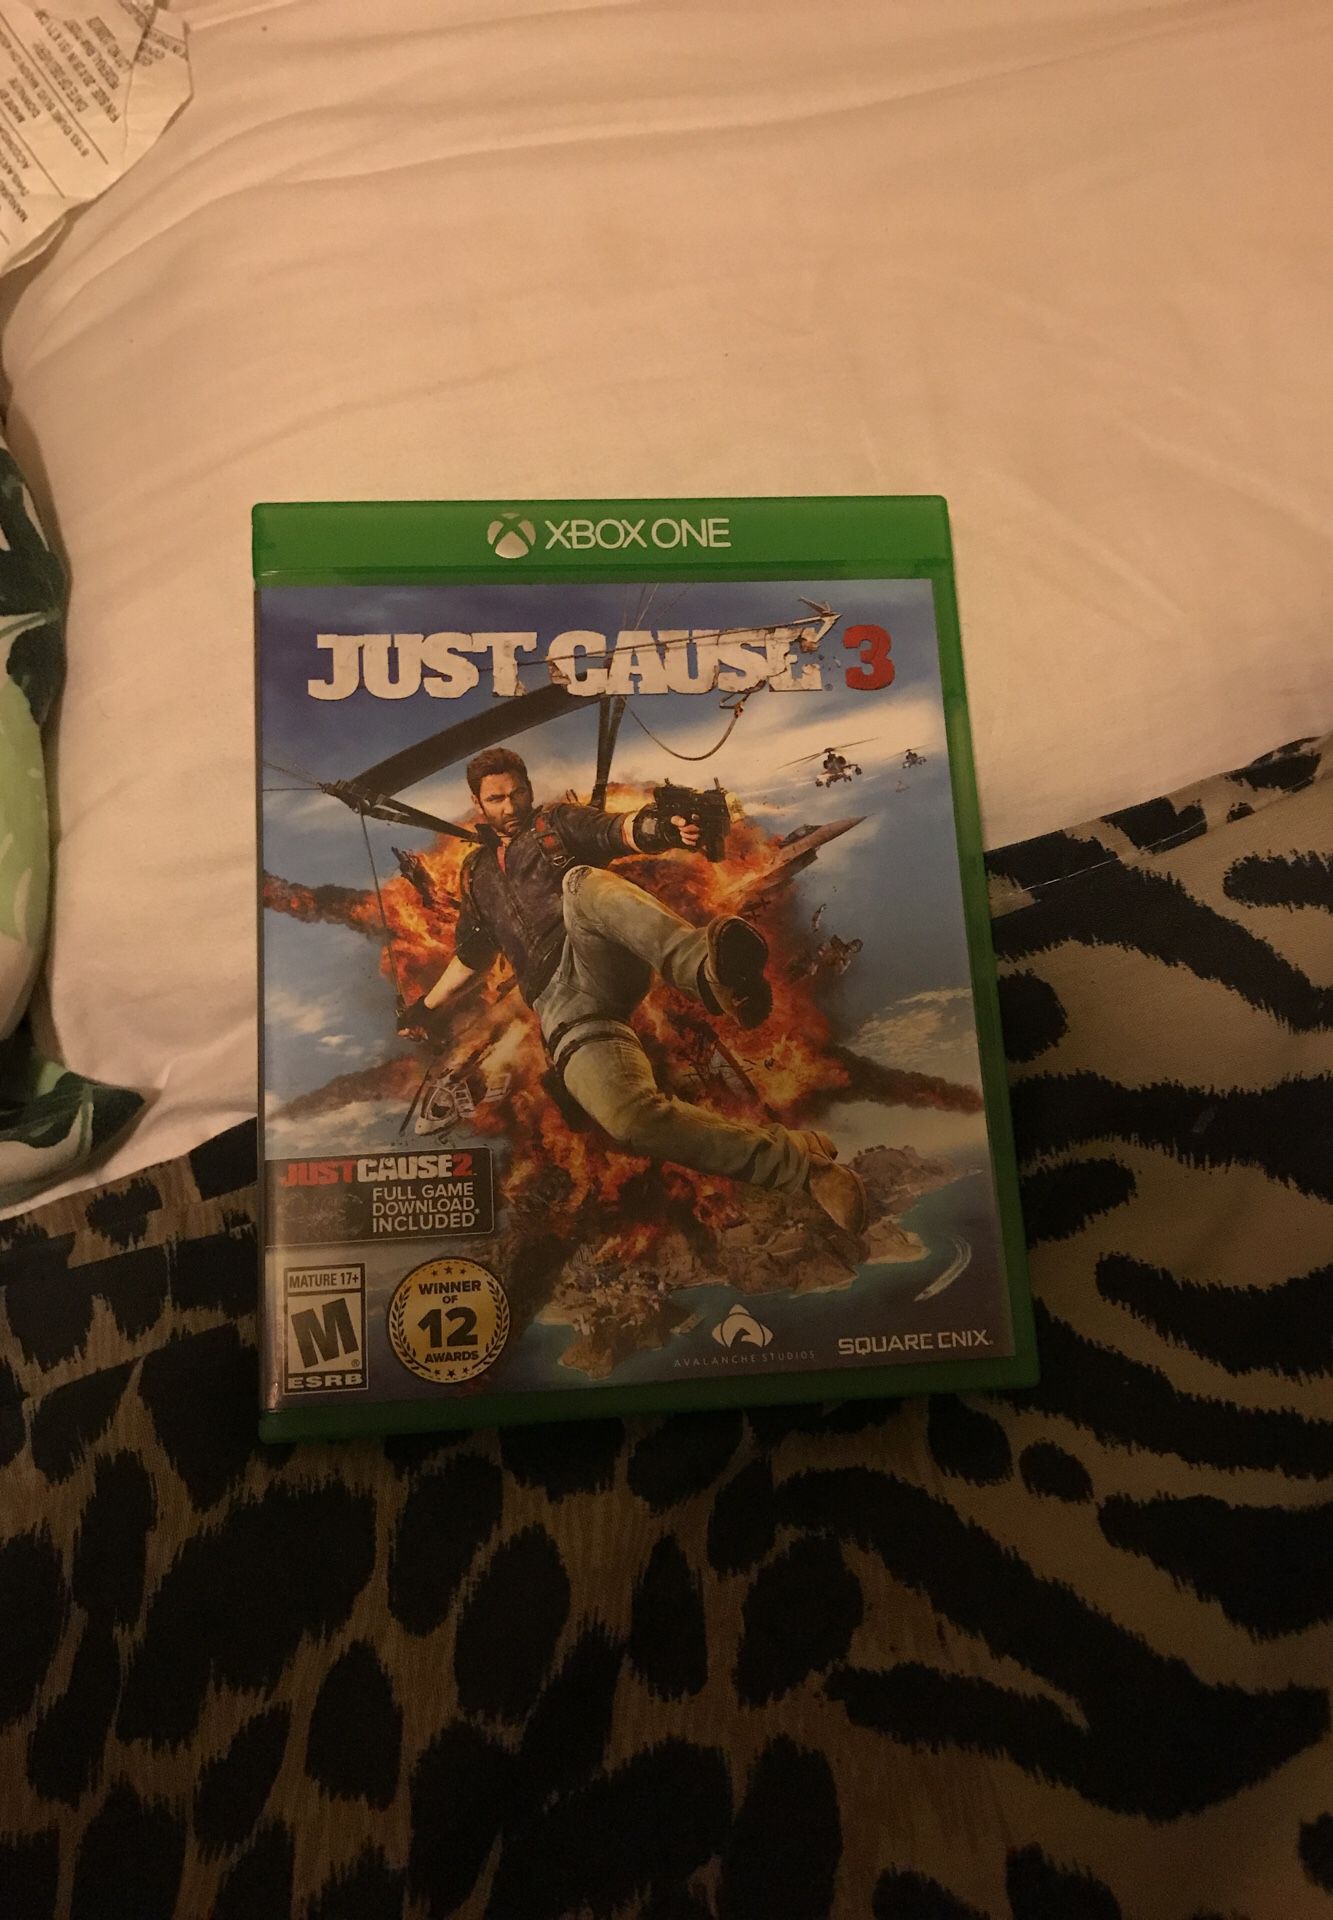 Just cause 3 and 2